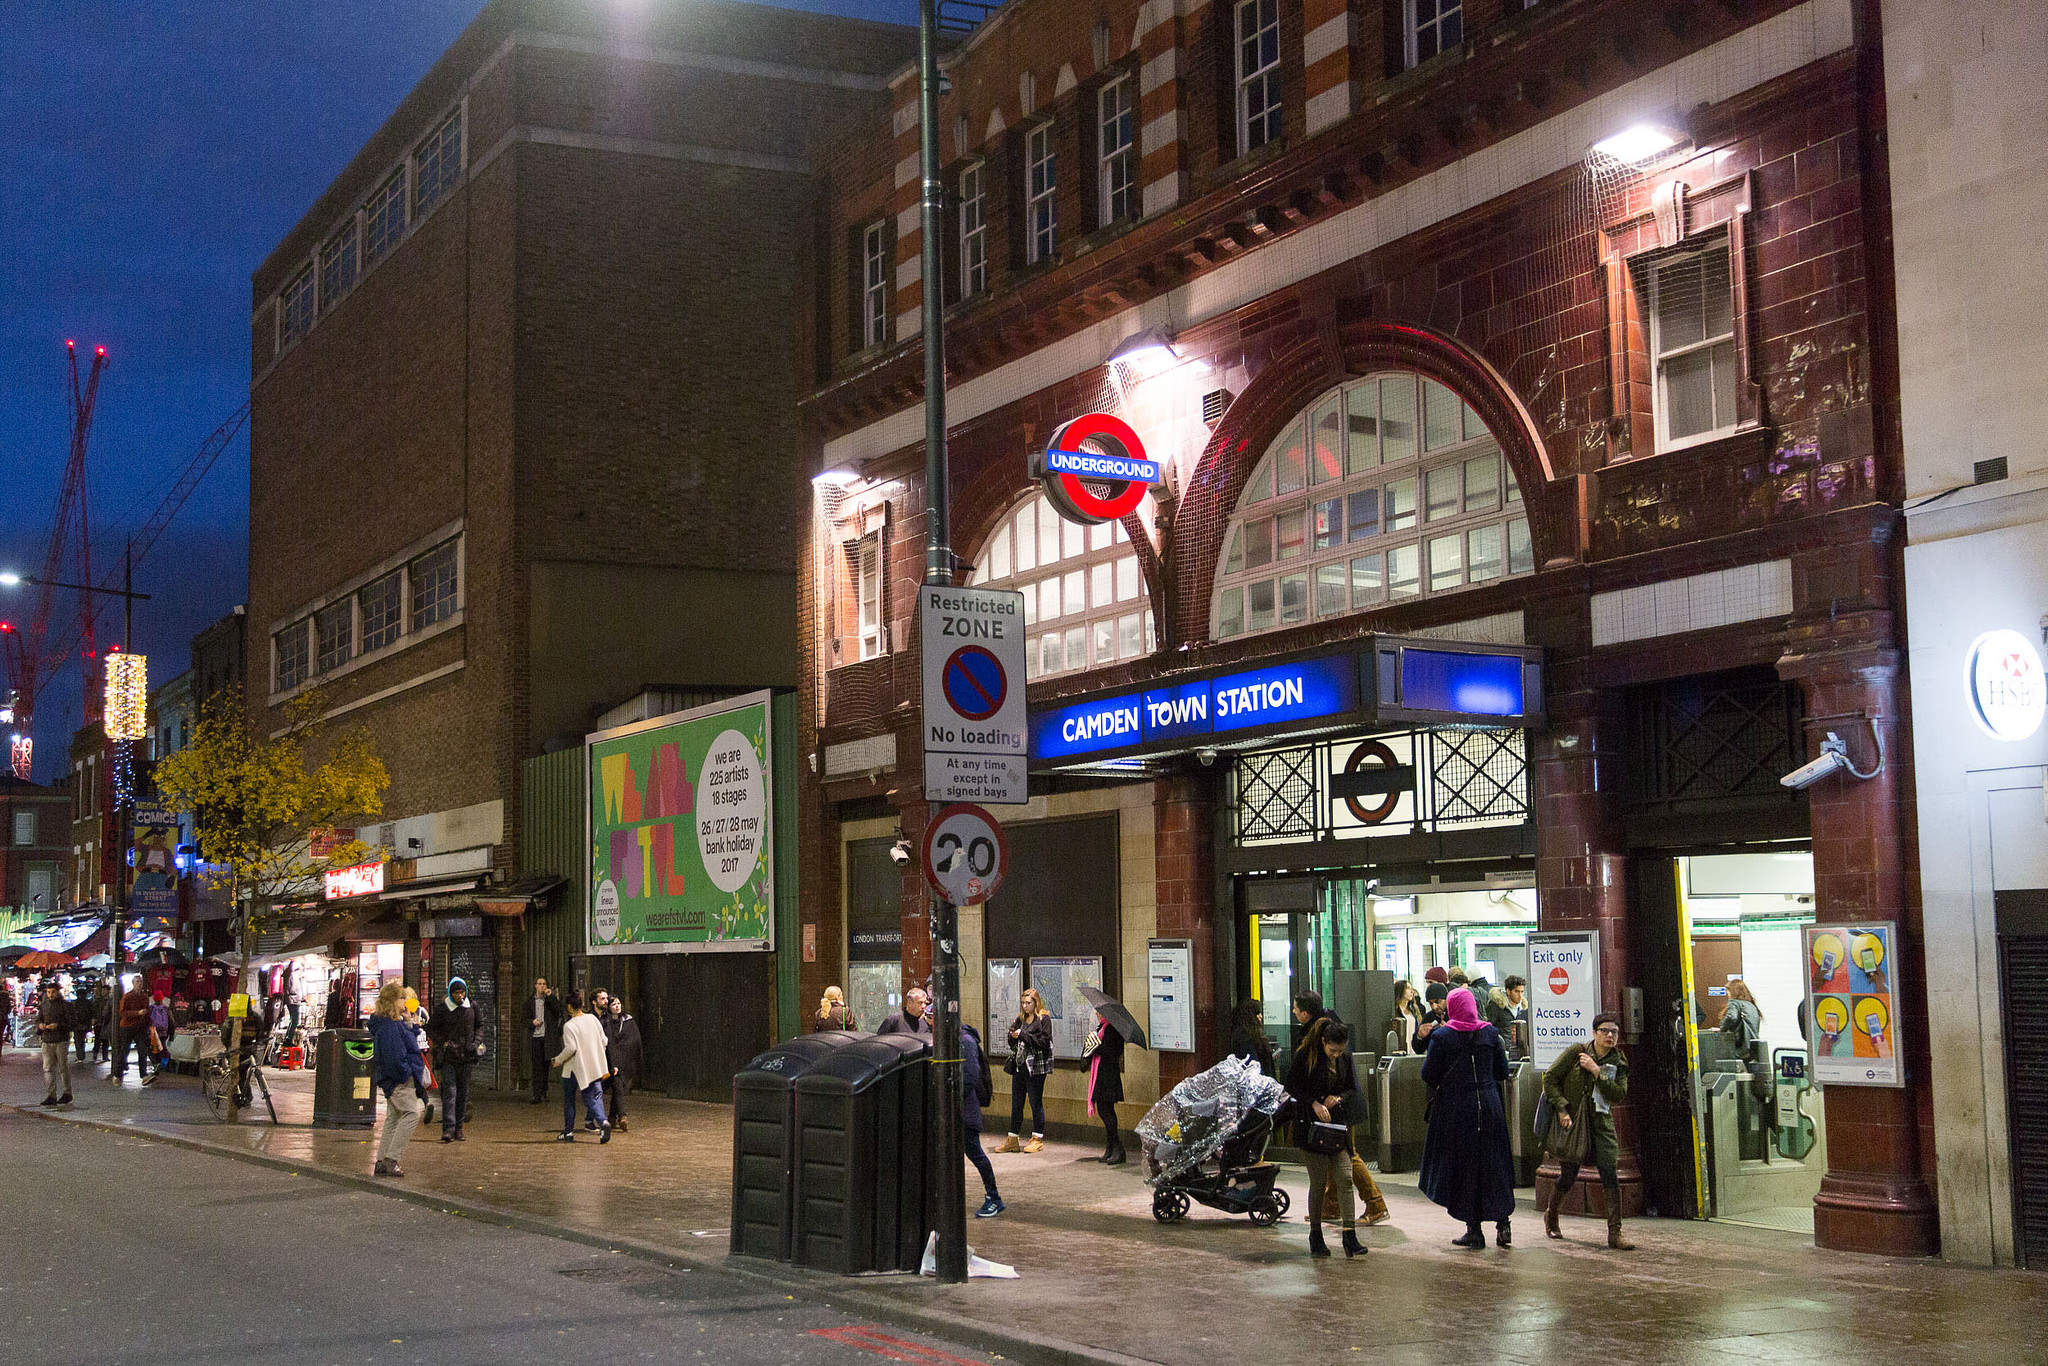 How can the Night Tube improve its safety record?